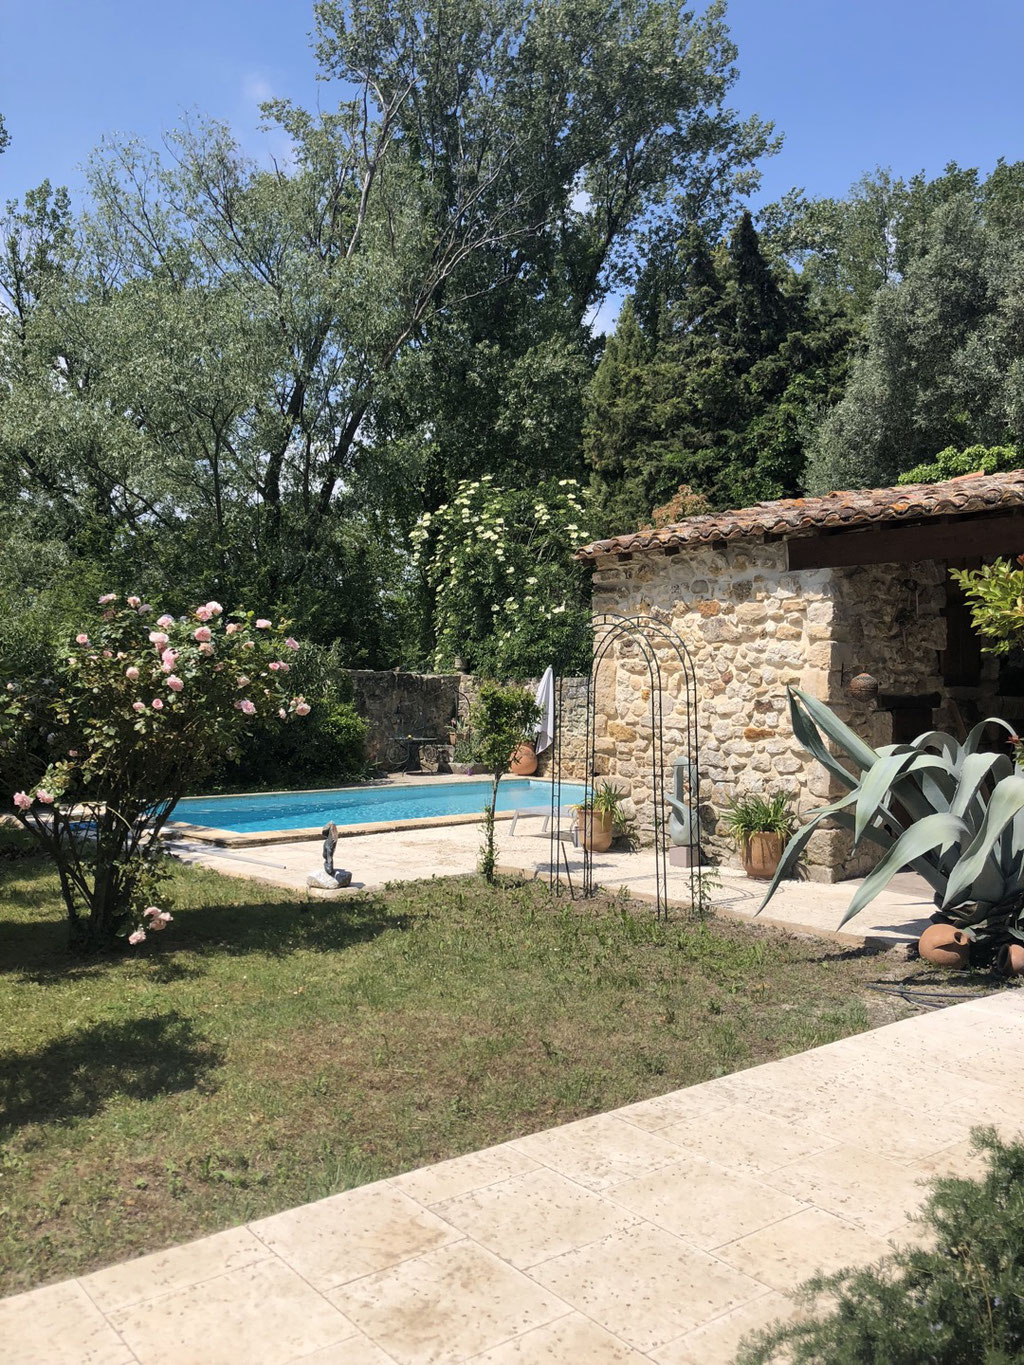 Leaving our house in Bourdic to go explore the surroundings in the Provence, South of France